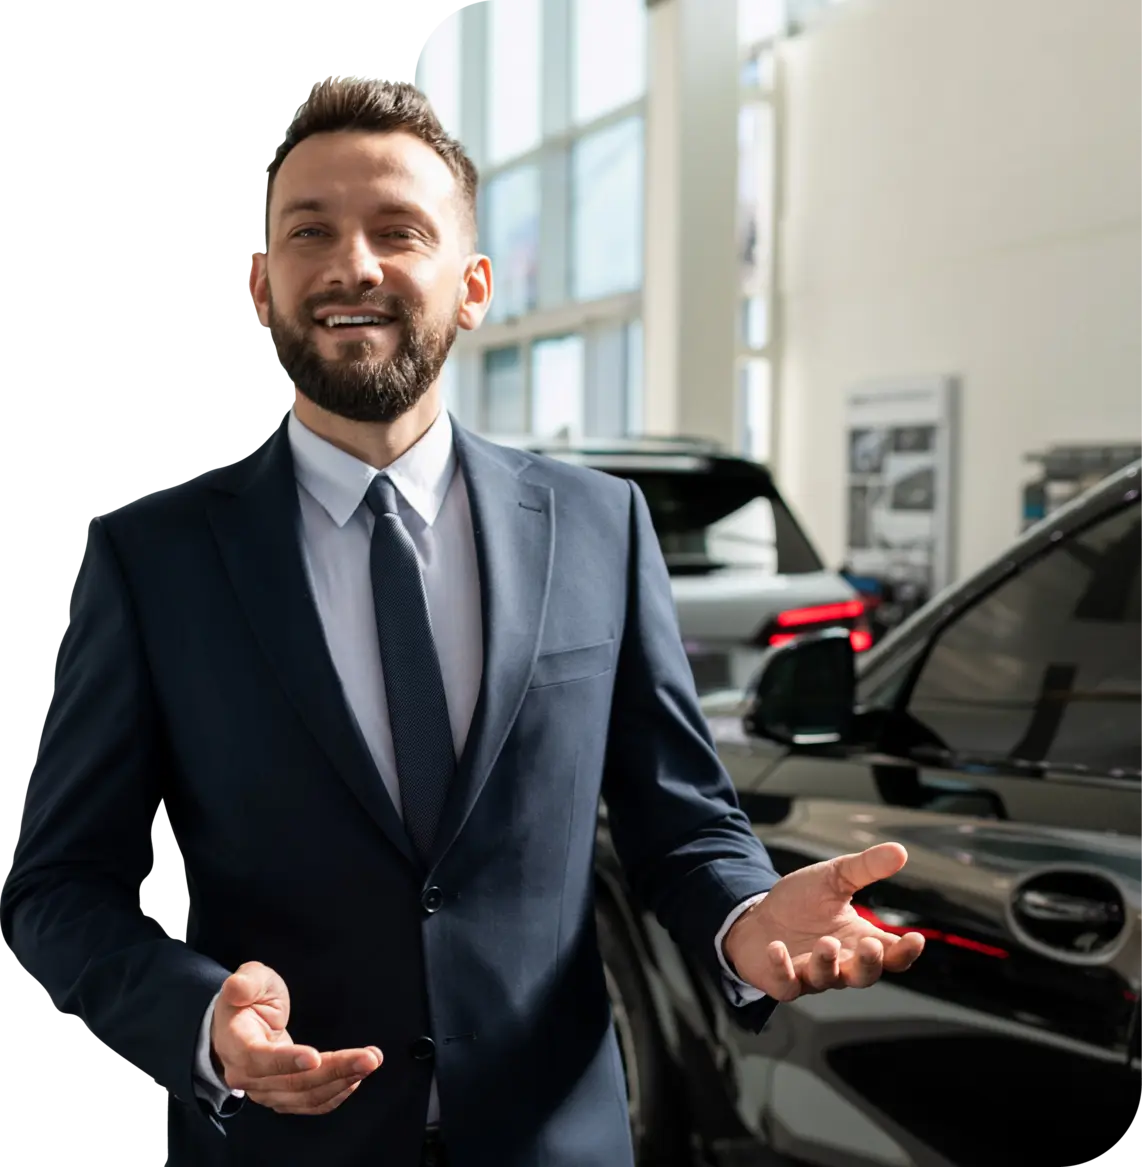 Car dealer stood in the showroom while smiling at the camera